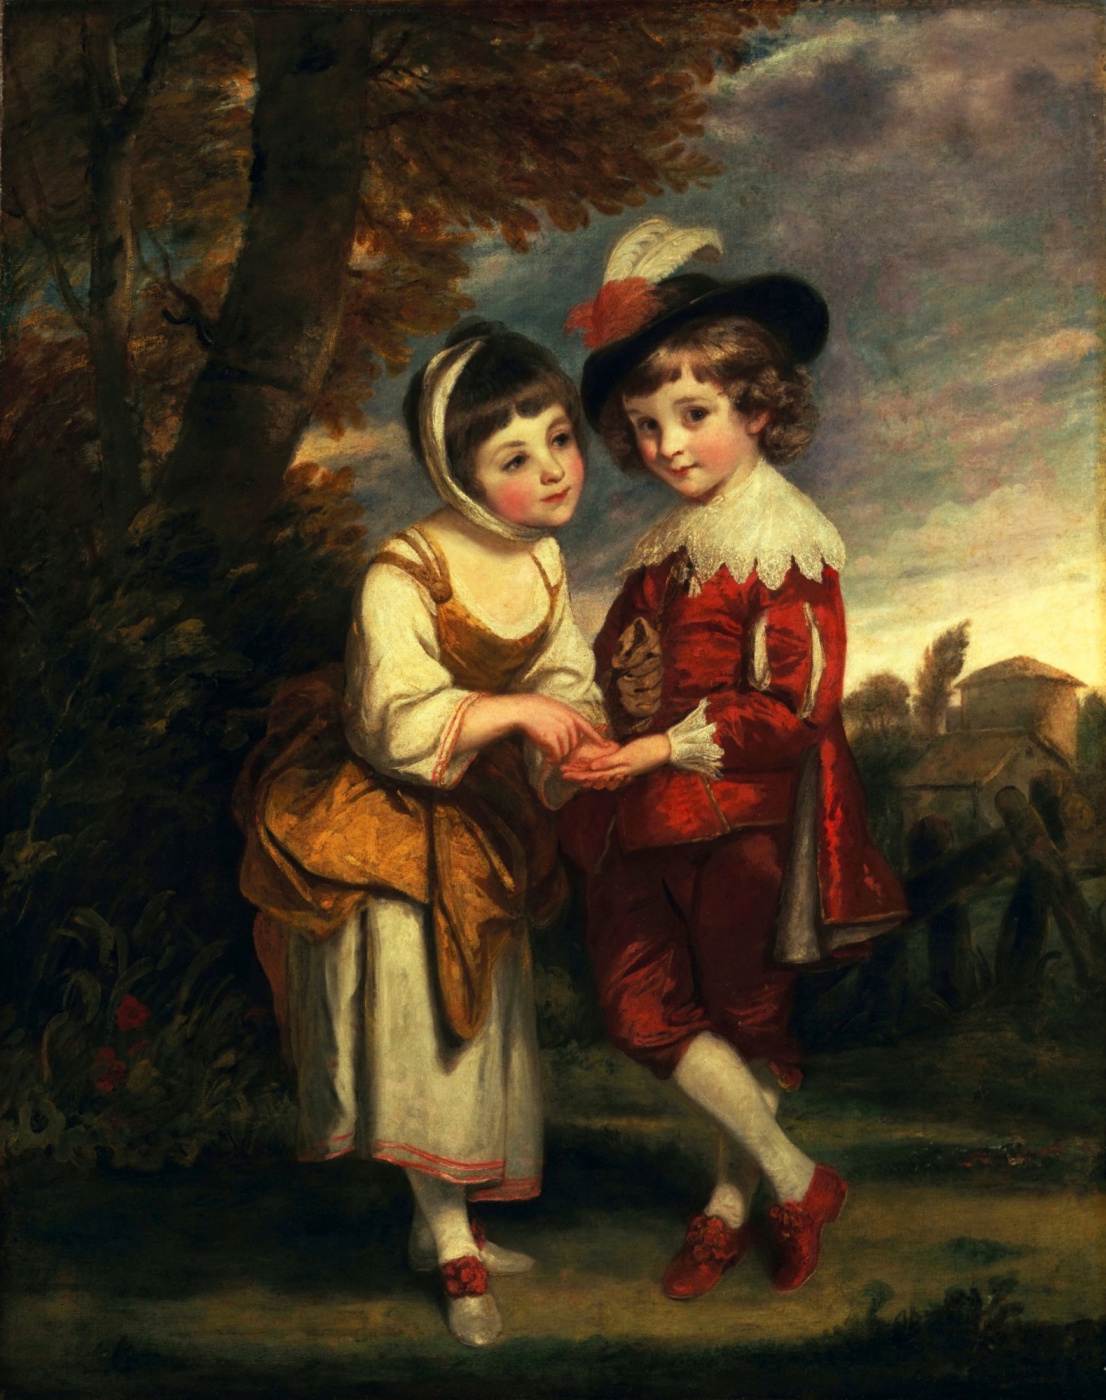 Joshua Reynolds. Young fortune teller. Lord Henry Spencer and Lady Charlotte Spencer